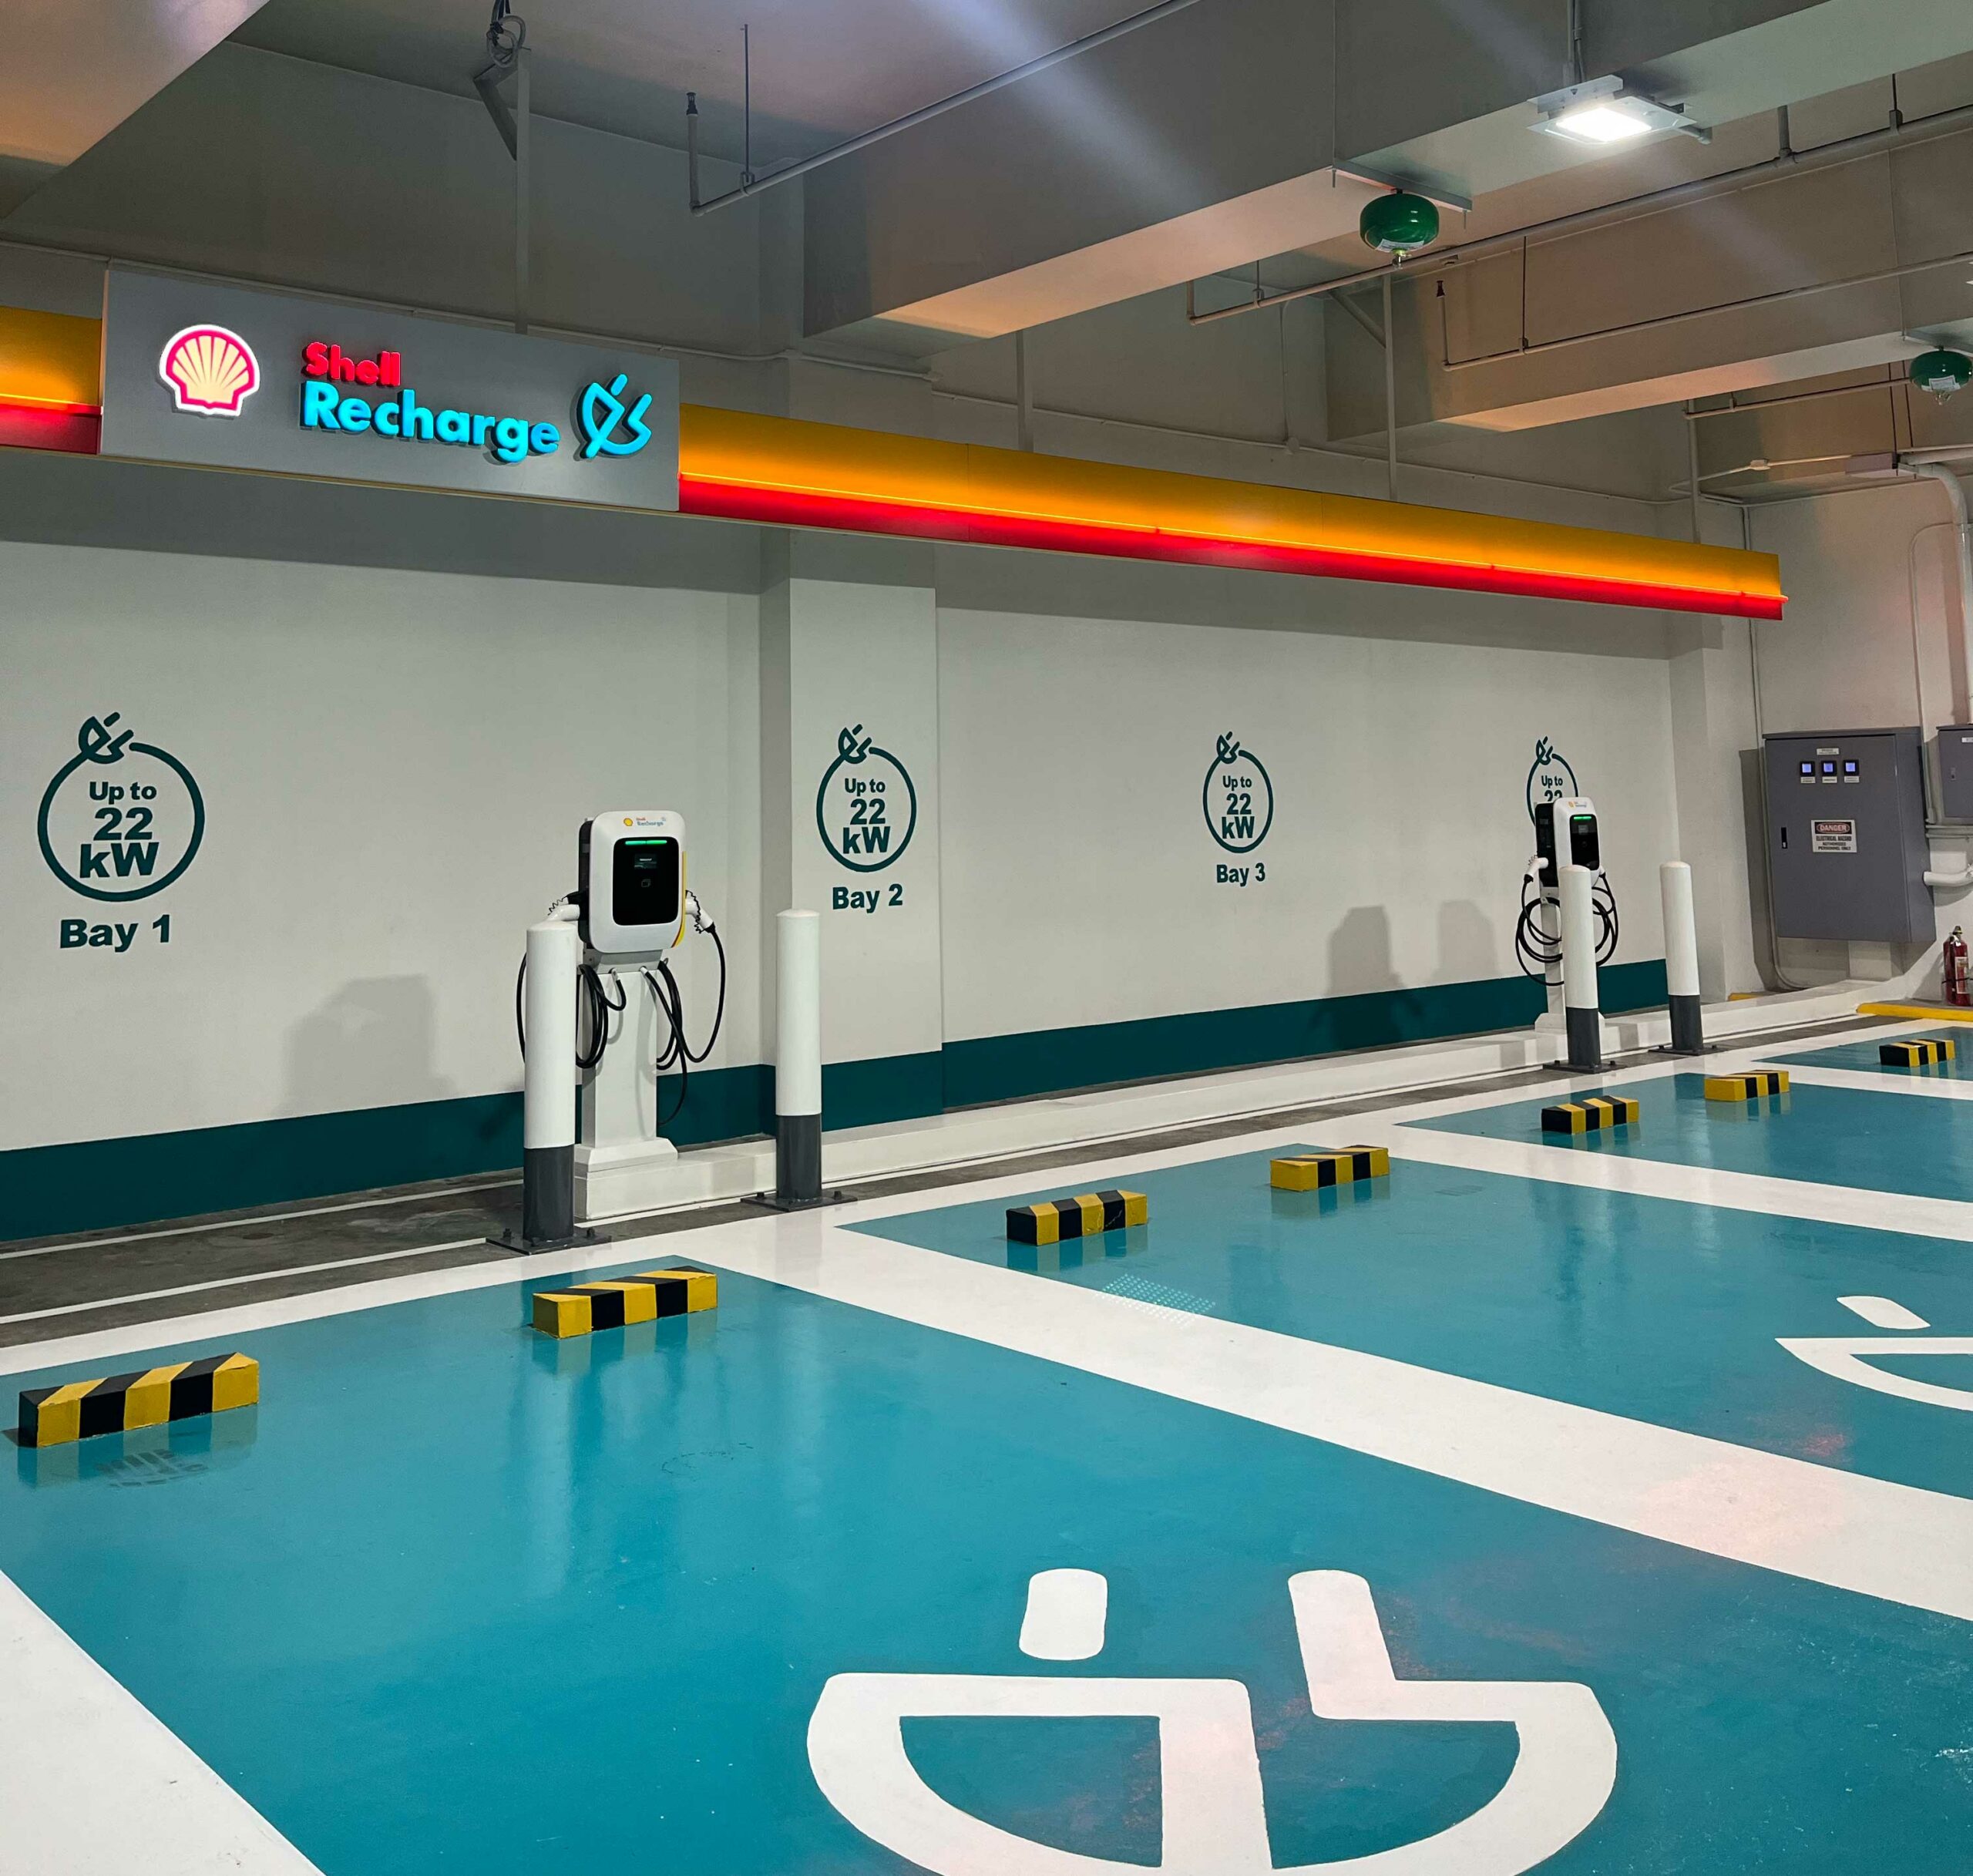 Ortigas Malls opens first electric vehicle charging station at Estancia Mall and Greenhills